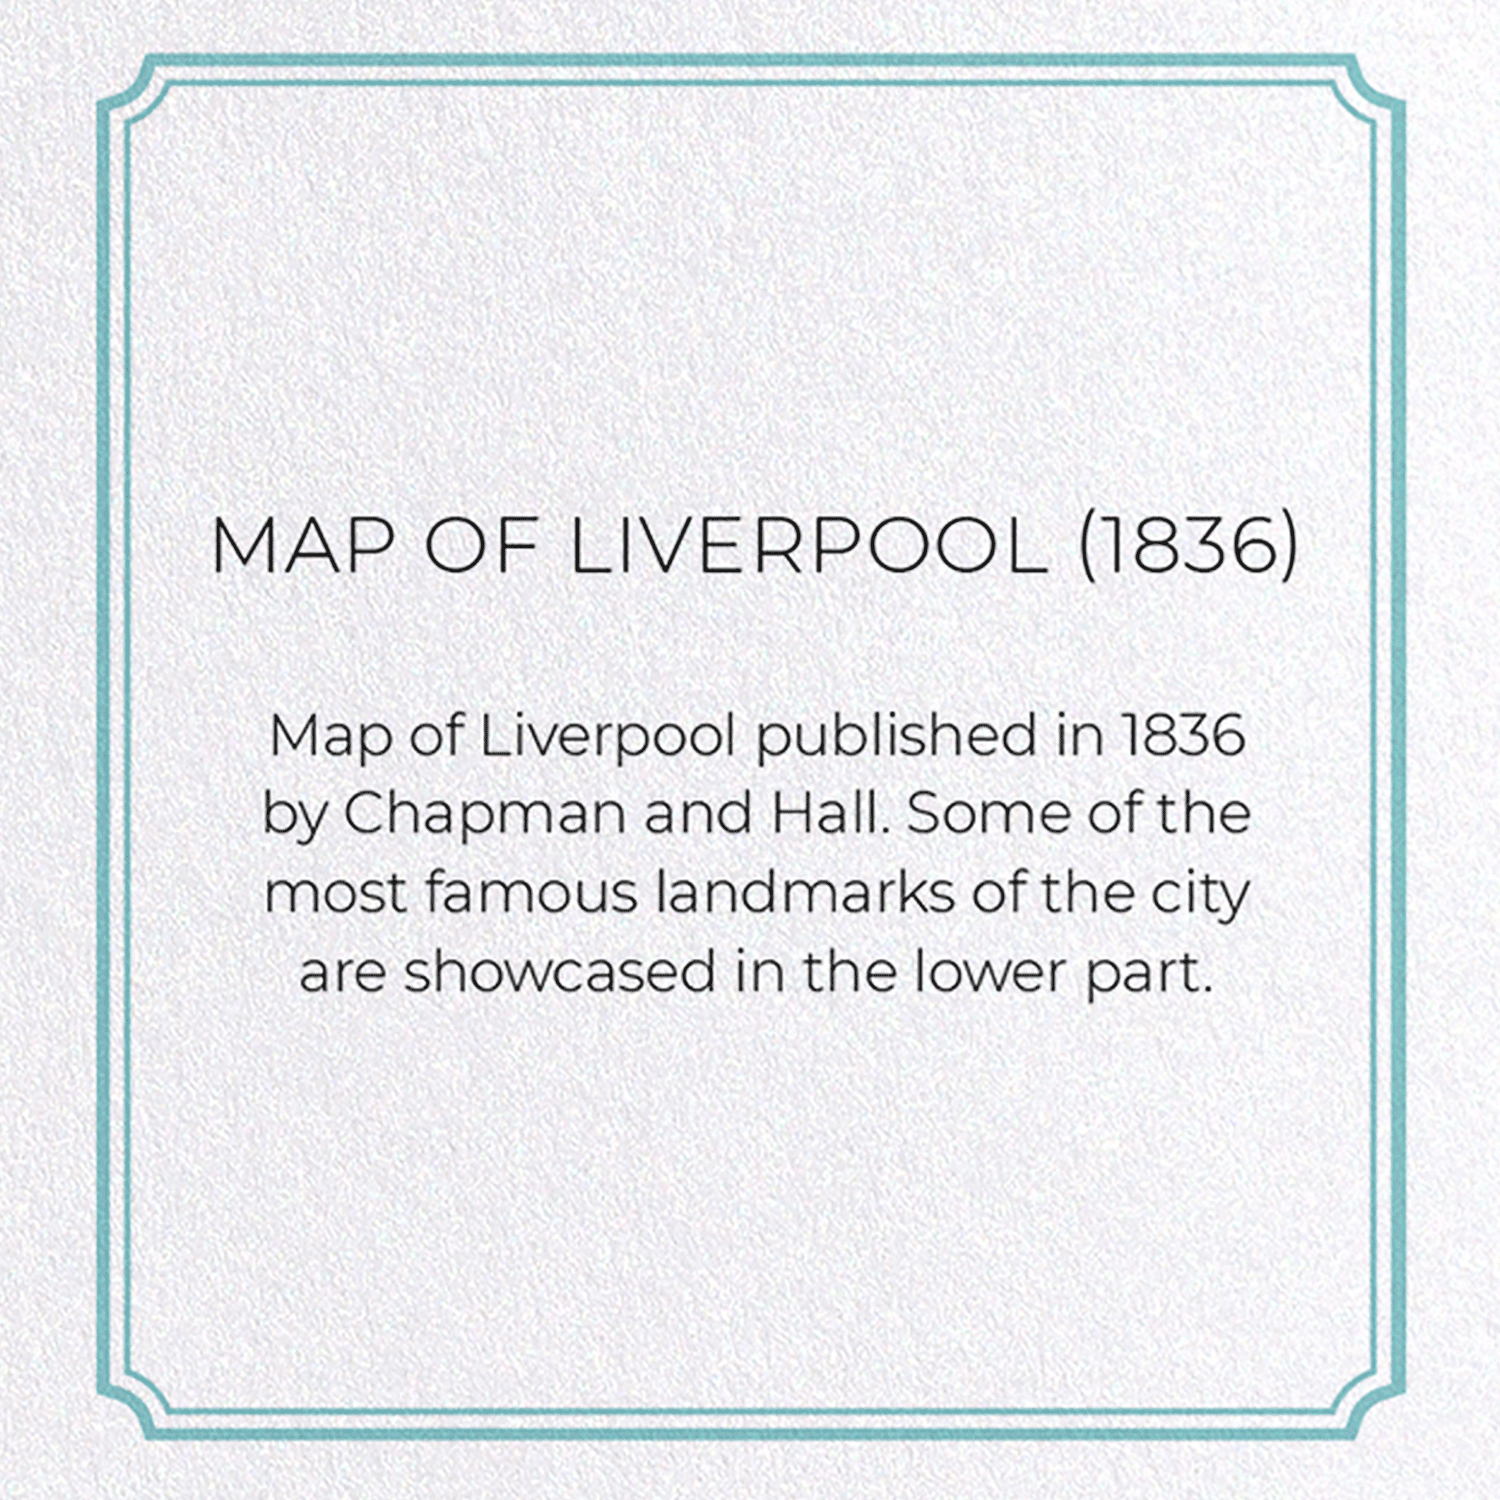 MAP OF LIVERPOOL (1836)